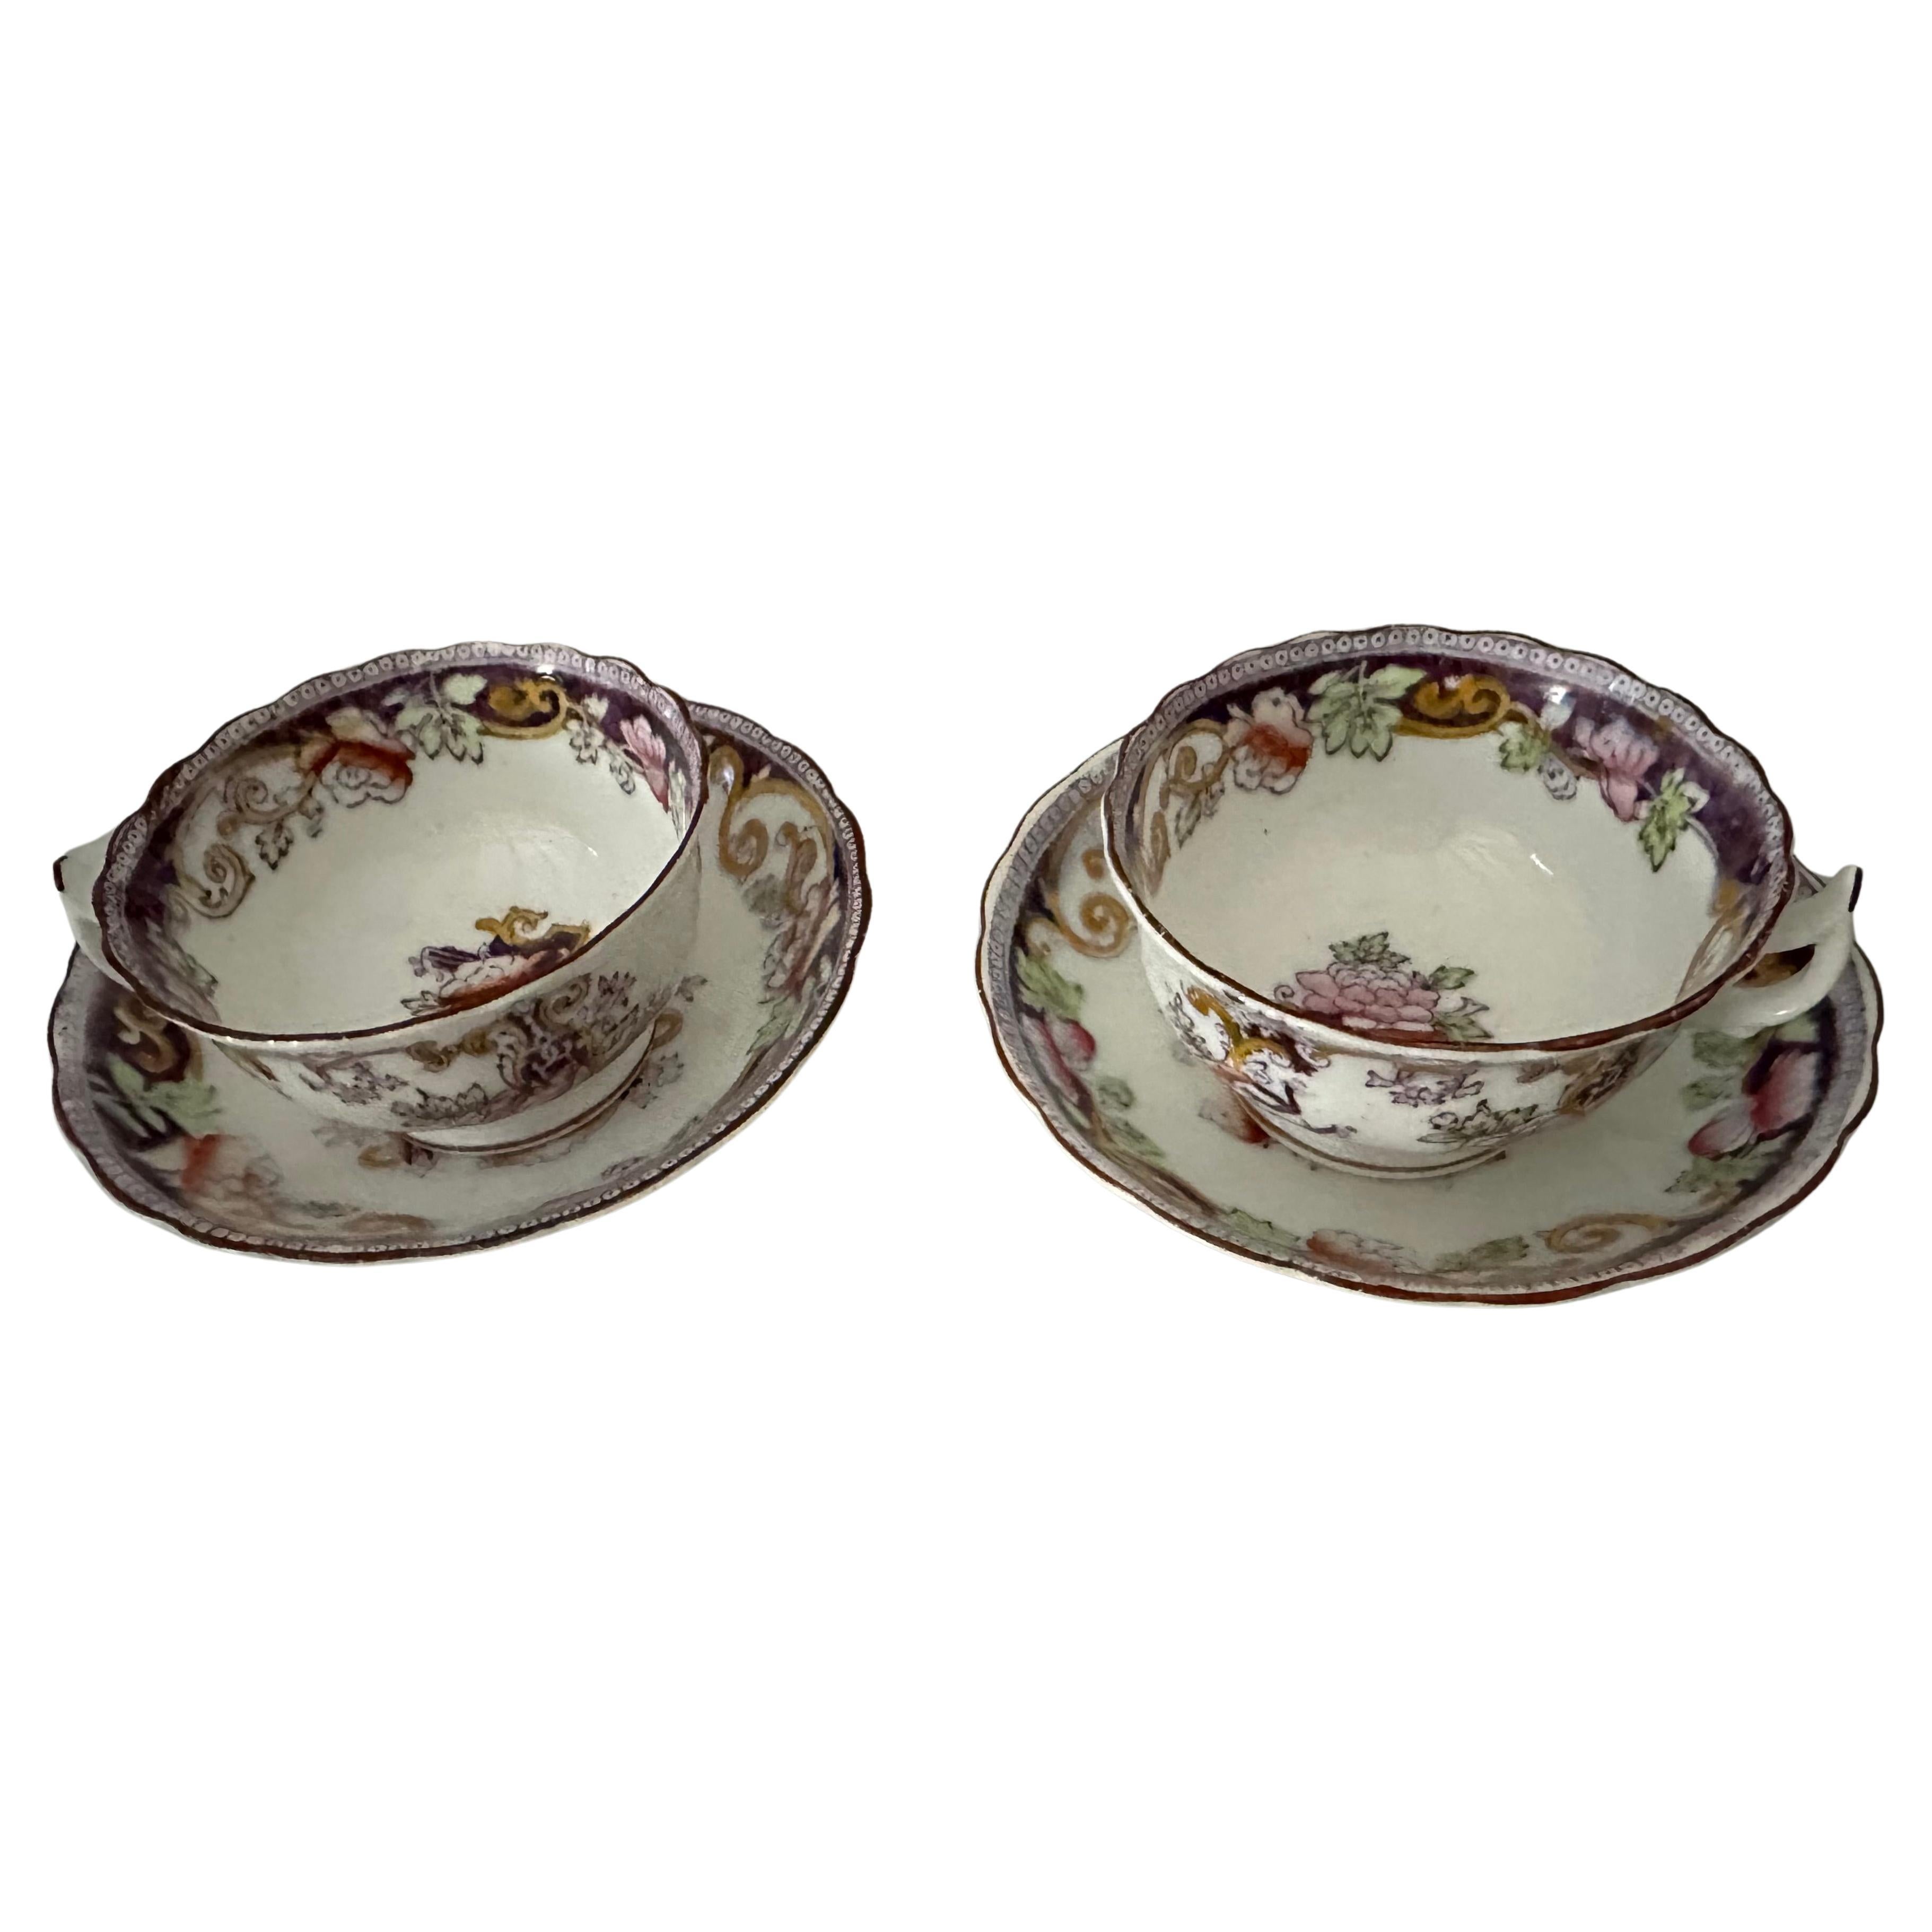 Treat yourself and a friend to enjoying a perfect cup of tea with this fine pair of antique Victorian 1890 English bone china cup and saucer sets.  The sets are embellished in a royal purple with some pink, green and gold floral and scroll